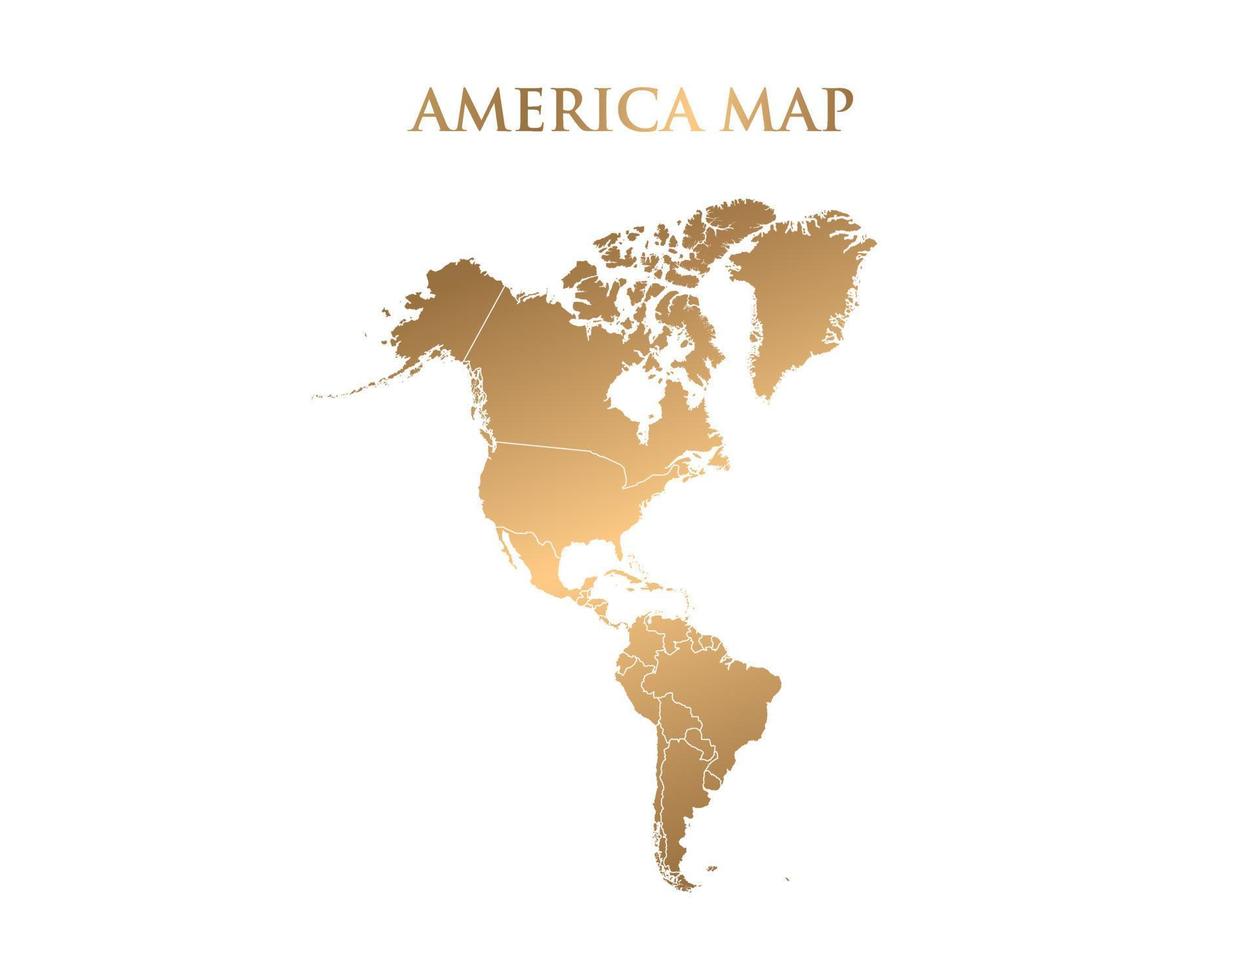 Vector Golden map of South America. Map of South America is isolated on a white background. Golden items mosaic based on solid yellow map of South America.